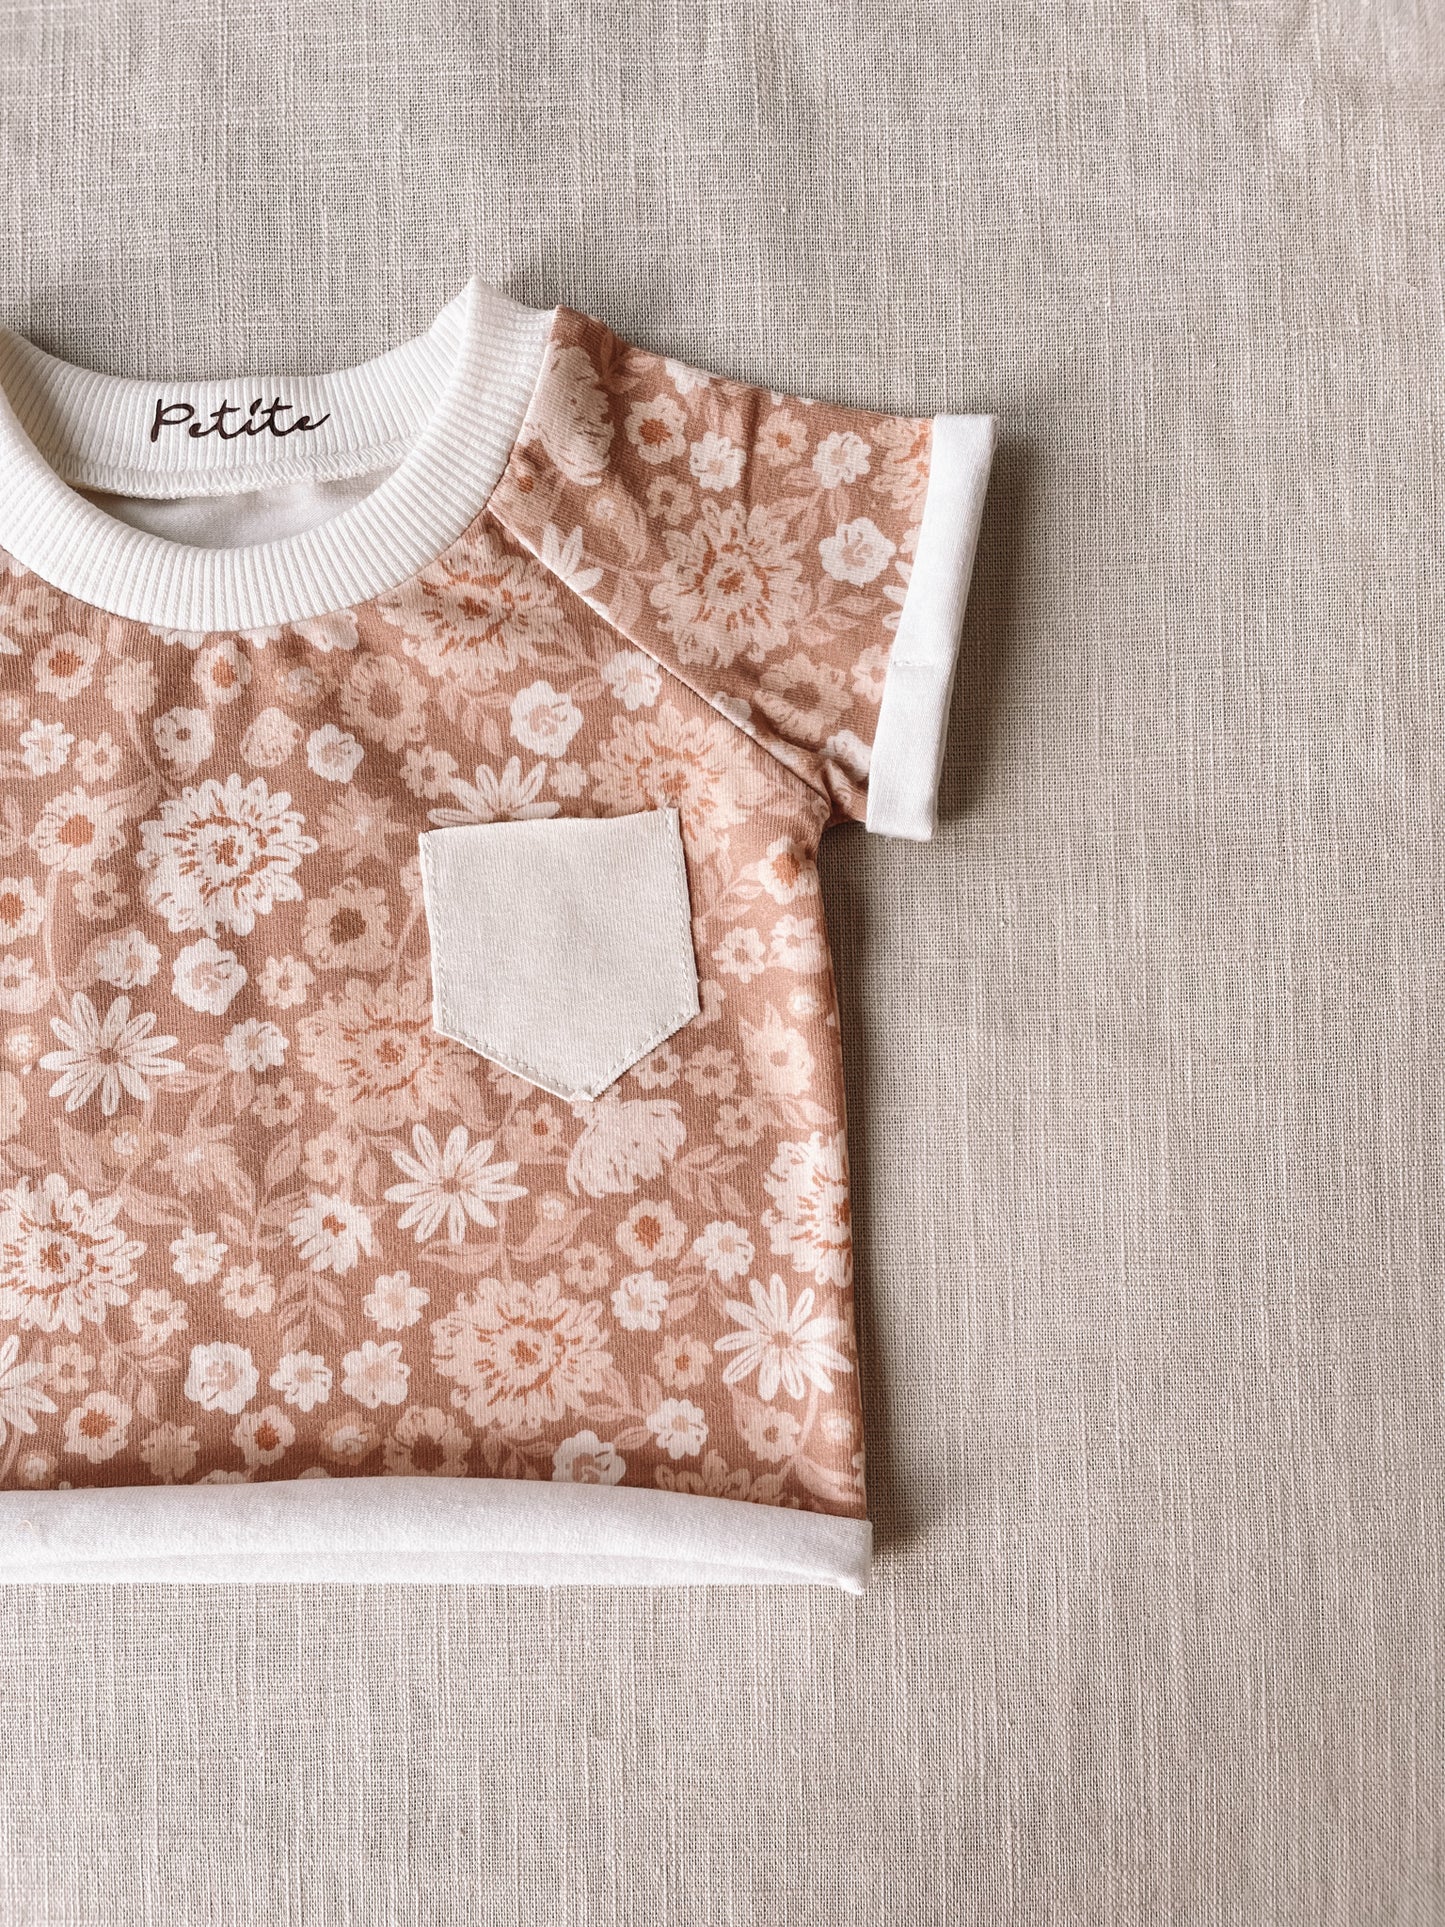 Jersey t-shirt / cappuccino floral